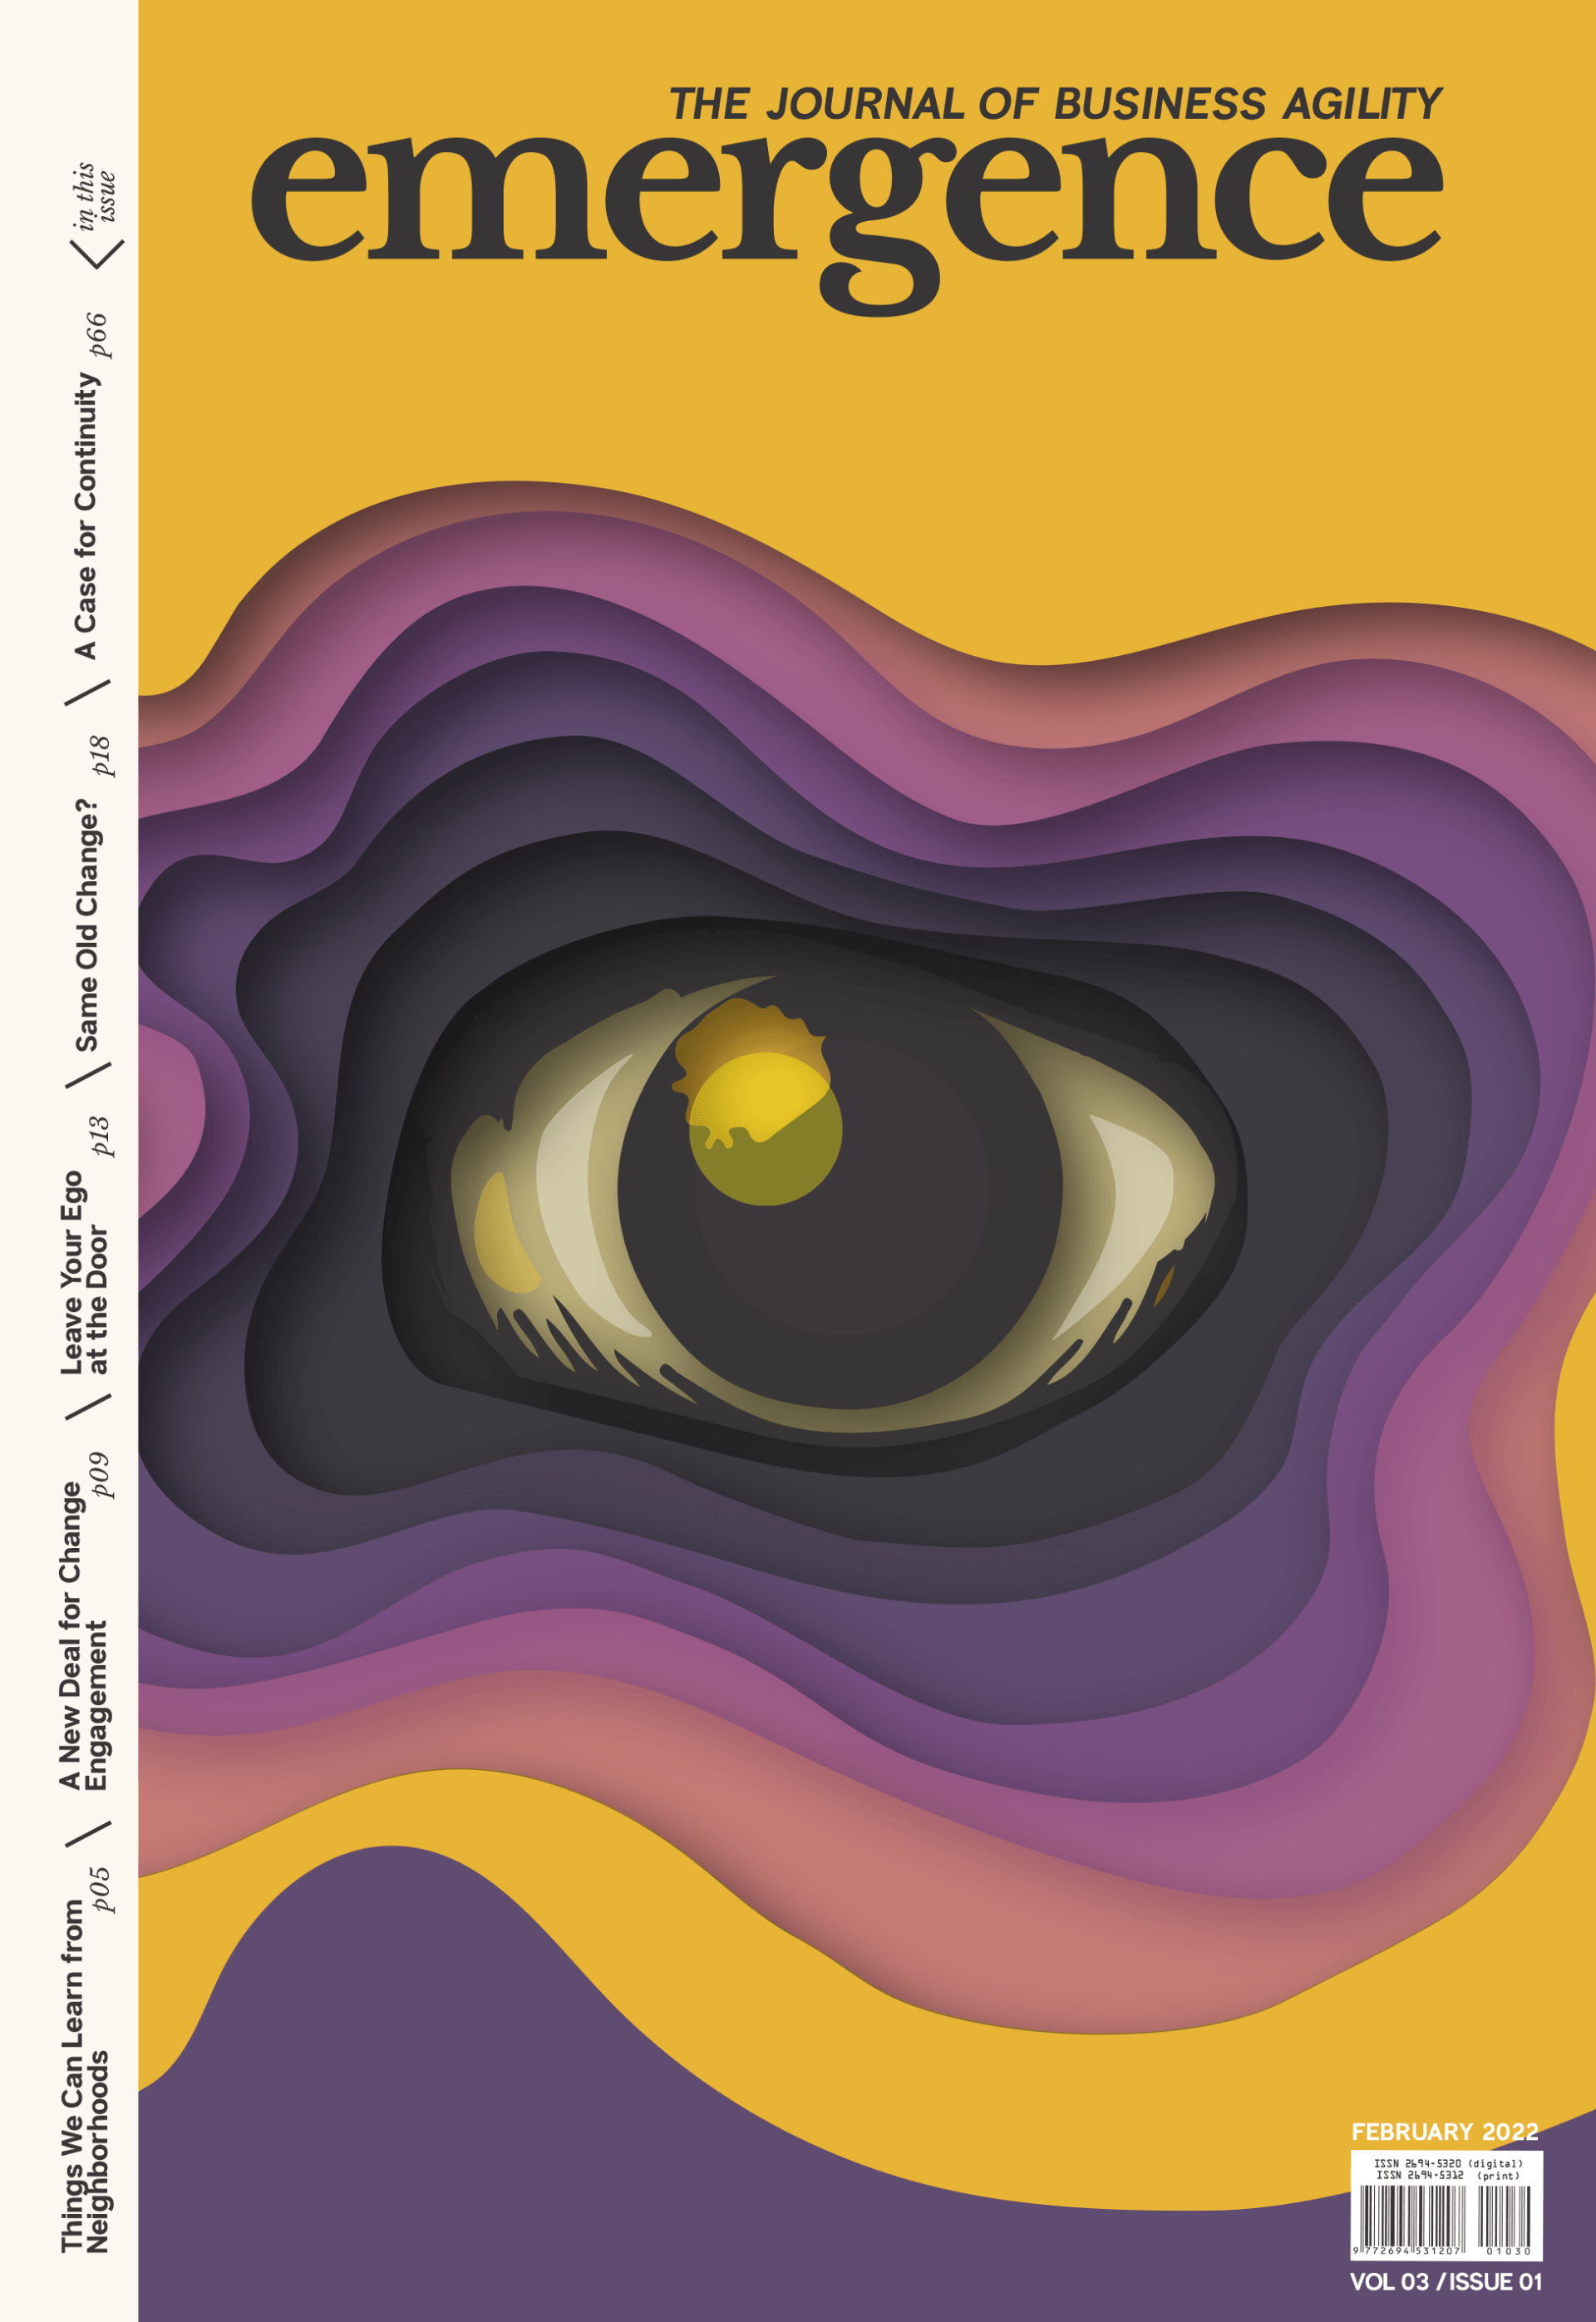 The cover of the February 2022 edition of Emergence, gold and purple in color with an abstract design with an eyeball illustration in the center